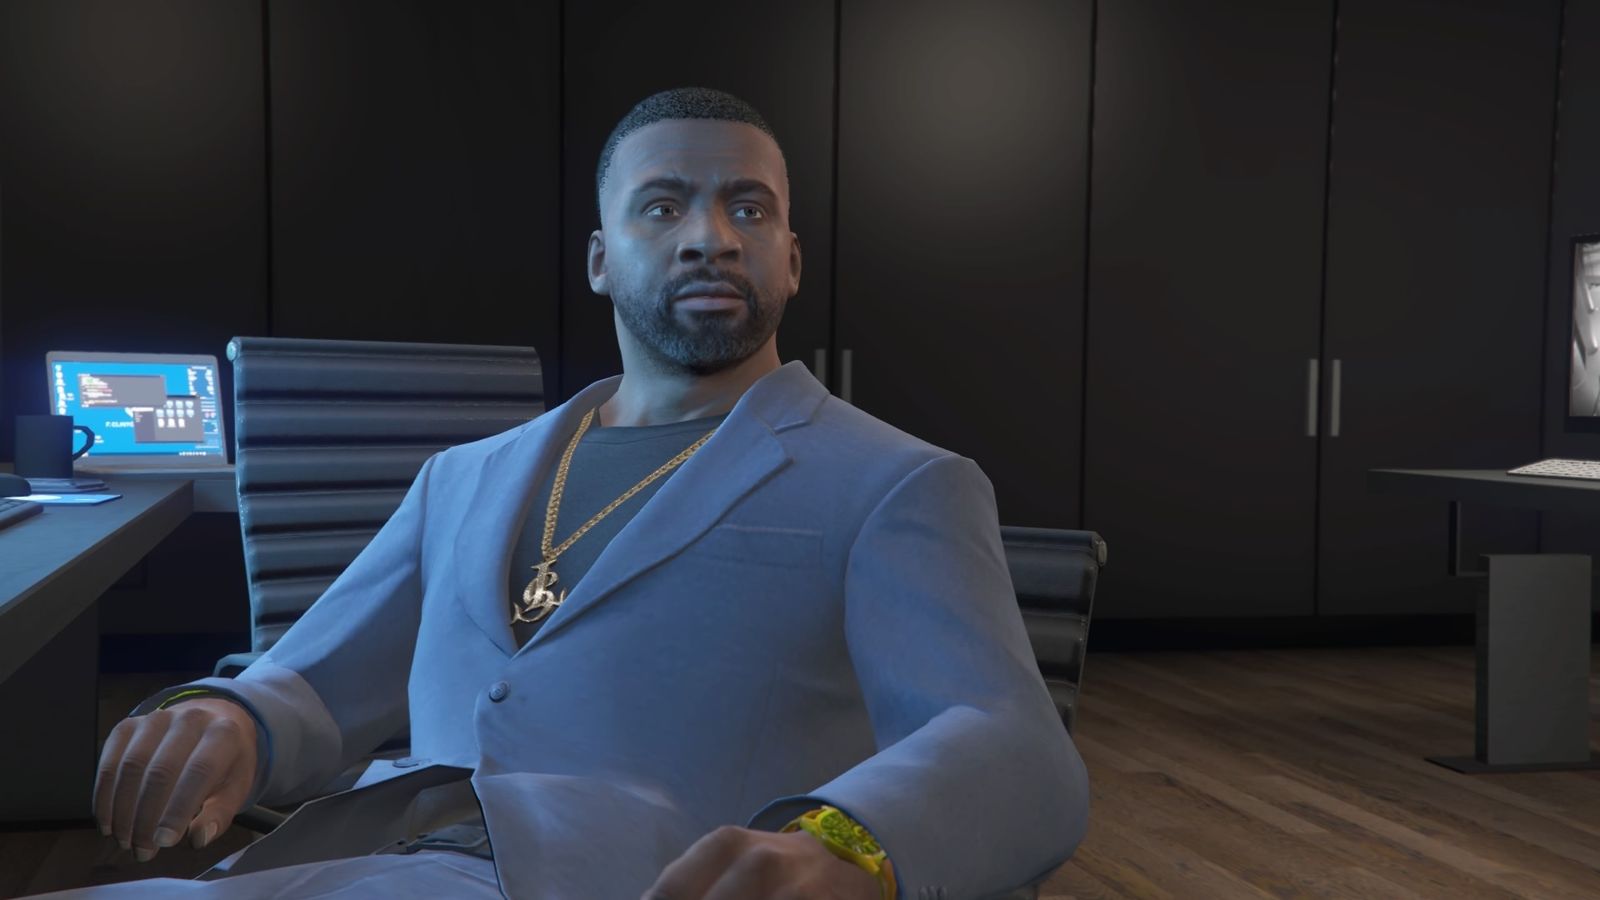 GTA Online The Contract DLC. Franklin Clinton in his chair in the Agency.